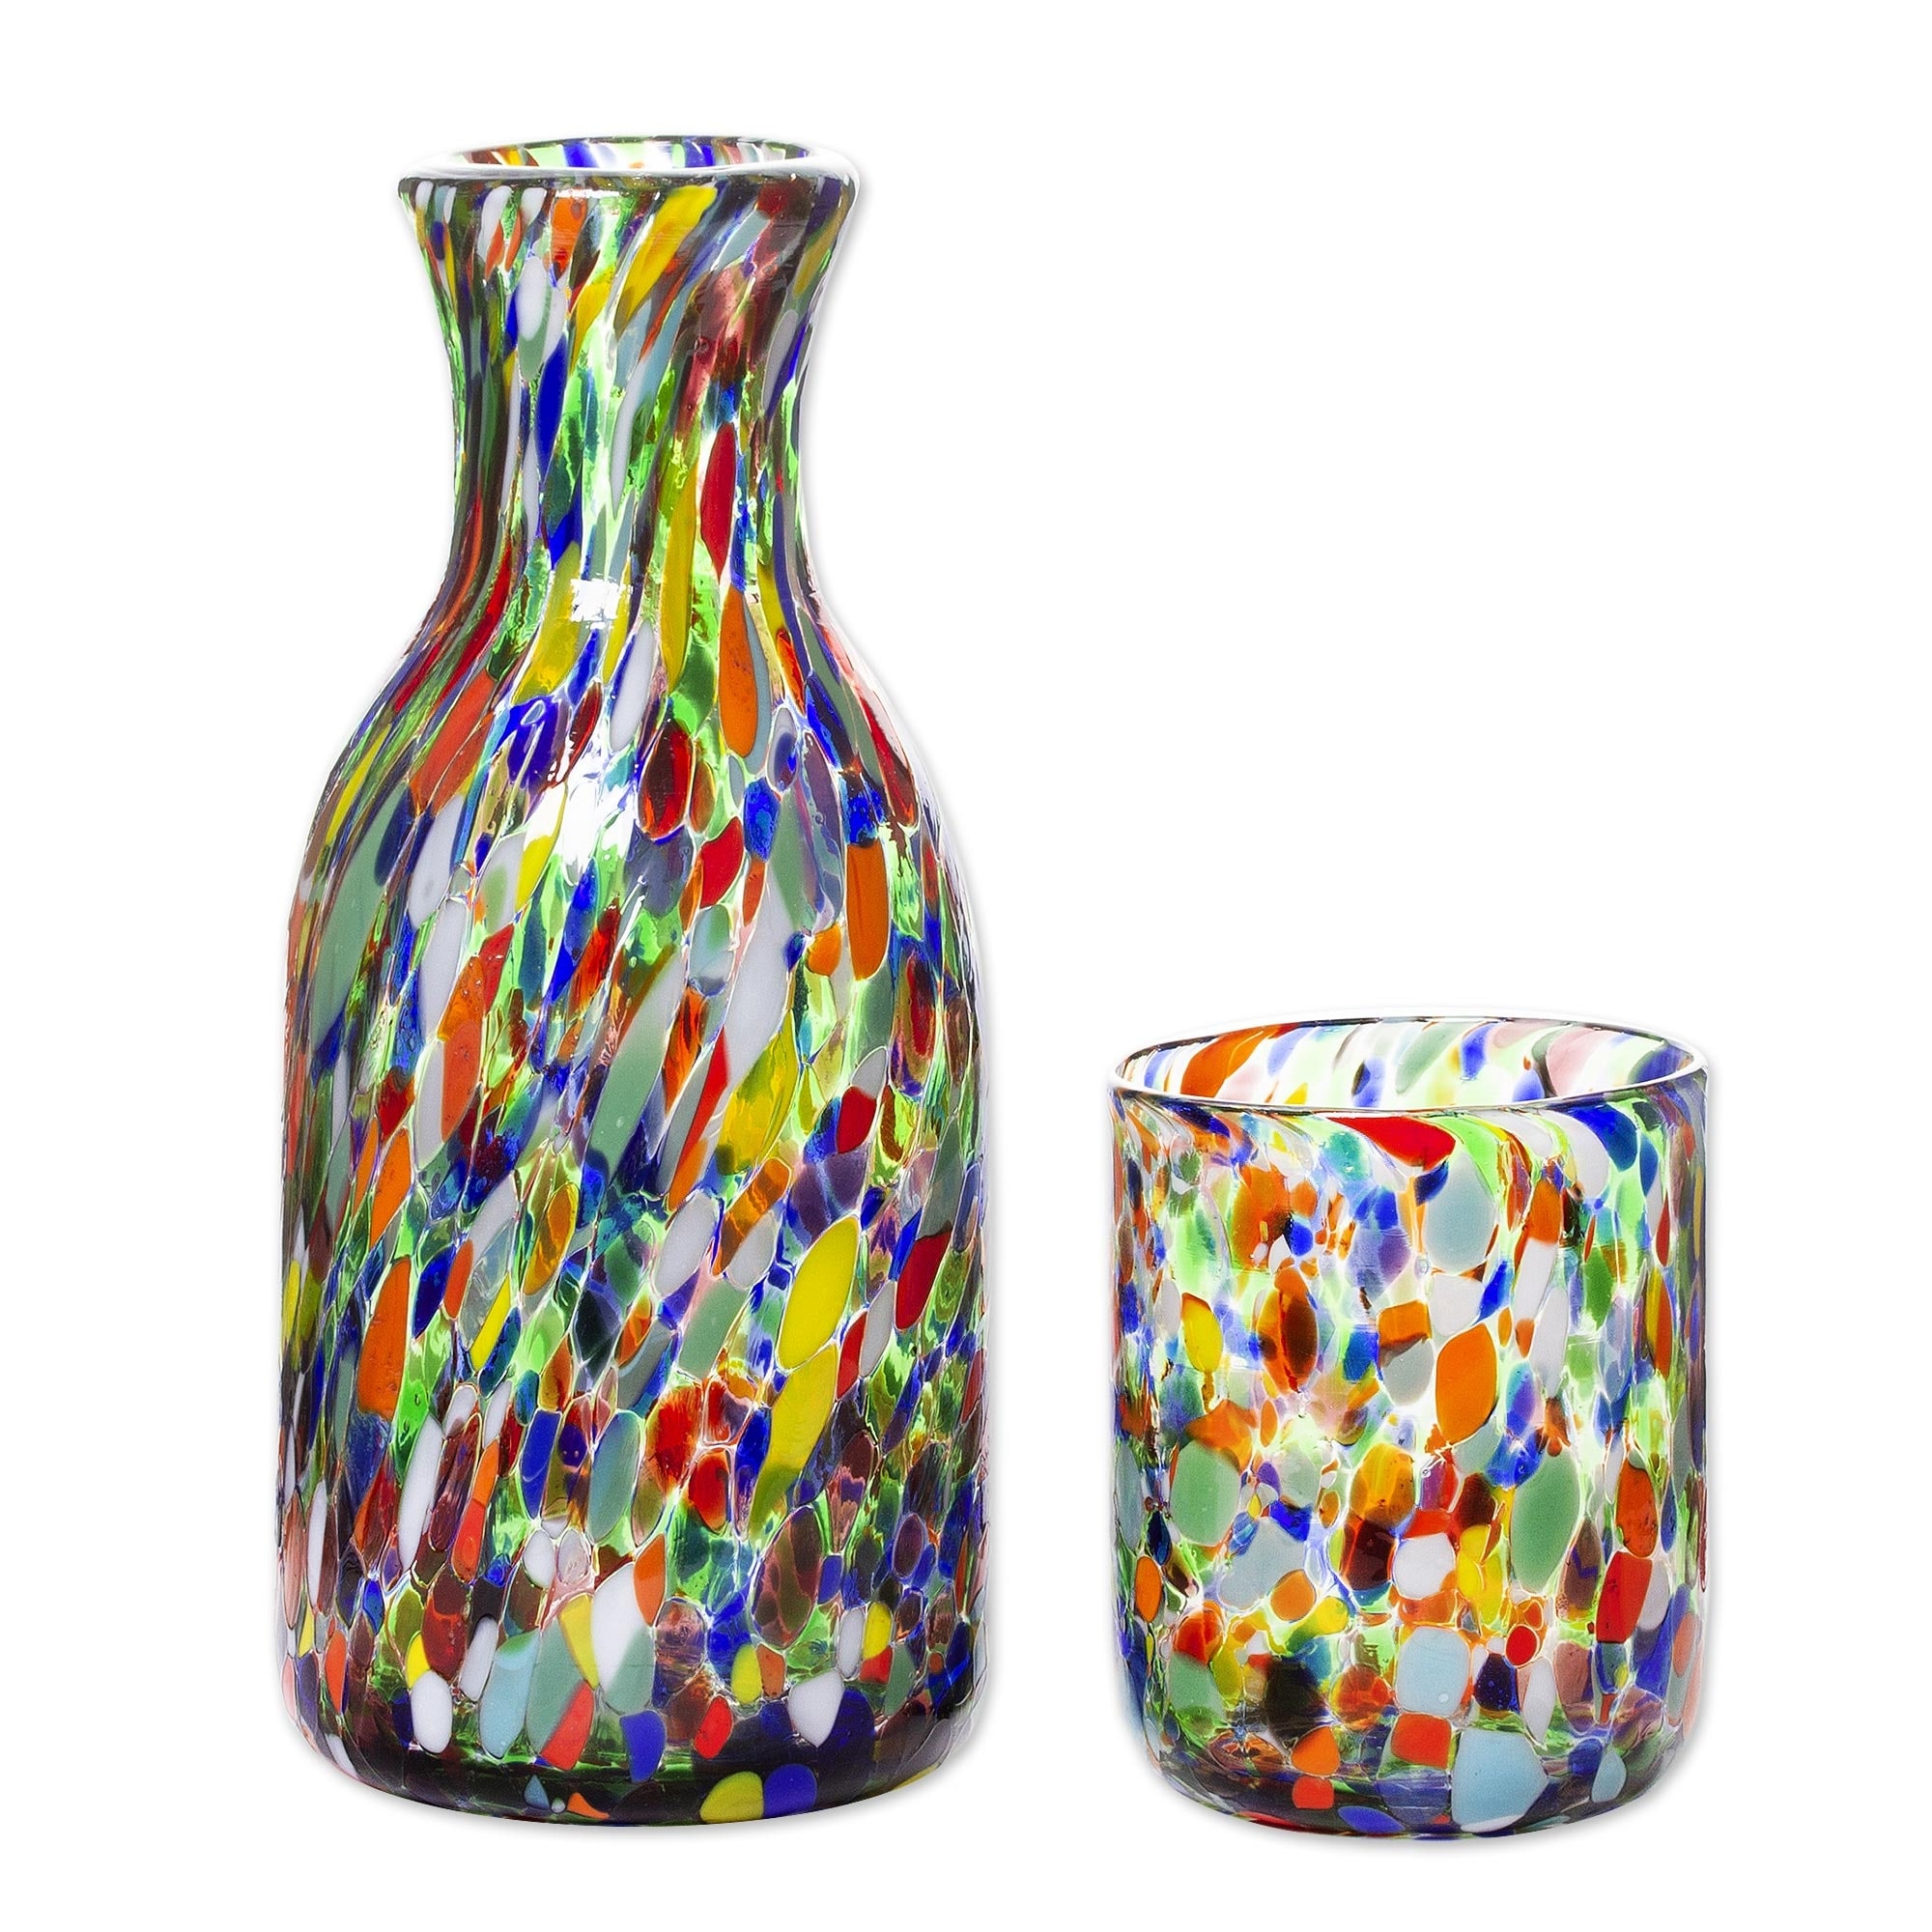 https://ak1.ostkcdn.com/images/products/is/images/direct/0de7f3f7c04e8ff5e695a41a050852c9ff211392/Novica-Handmade-Jubilant-Color-Handblown-Carafe-And-Glass-Set-%28Pair%29.jpg